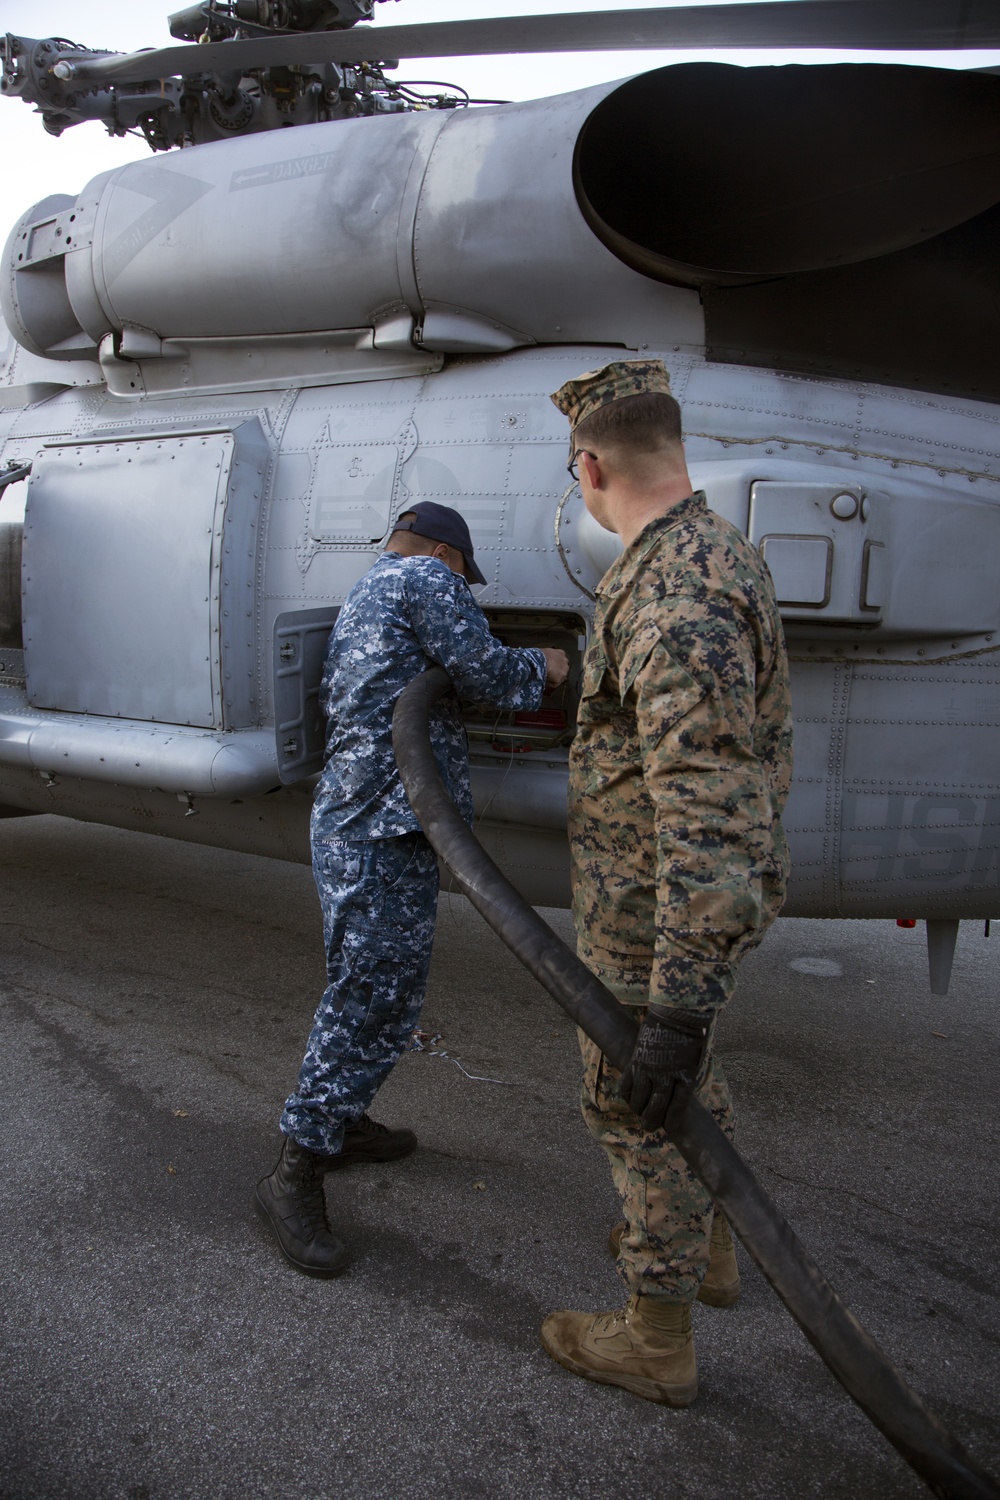 MWSS-372 Defuels Aircraft for Display